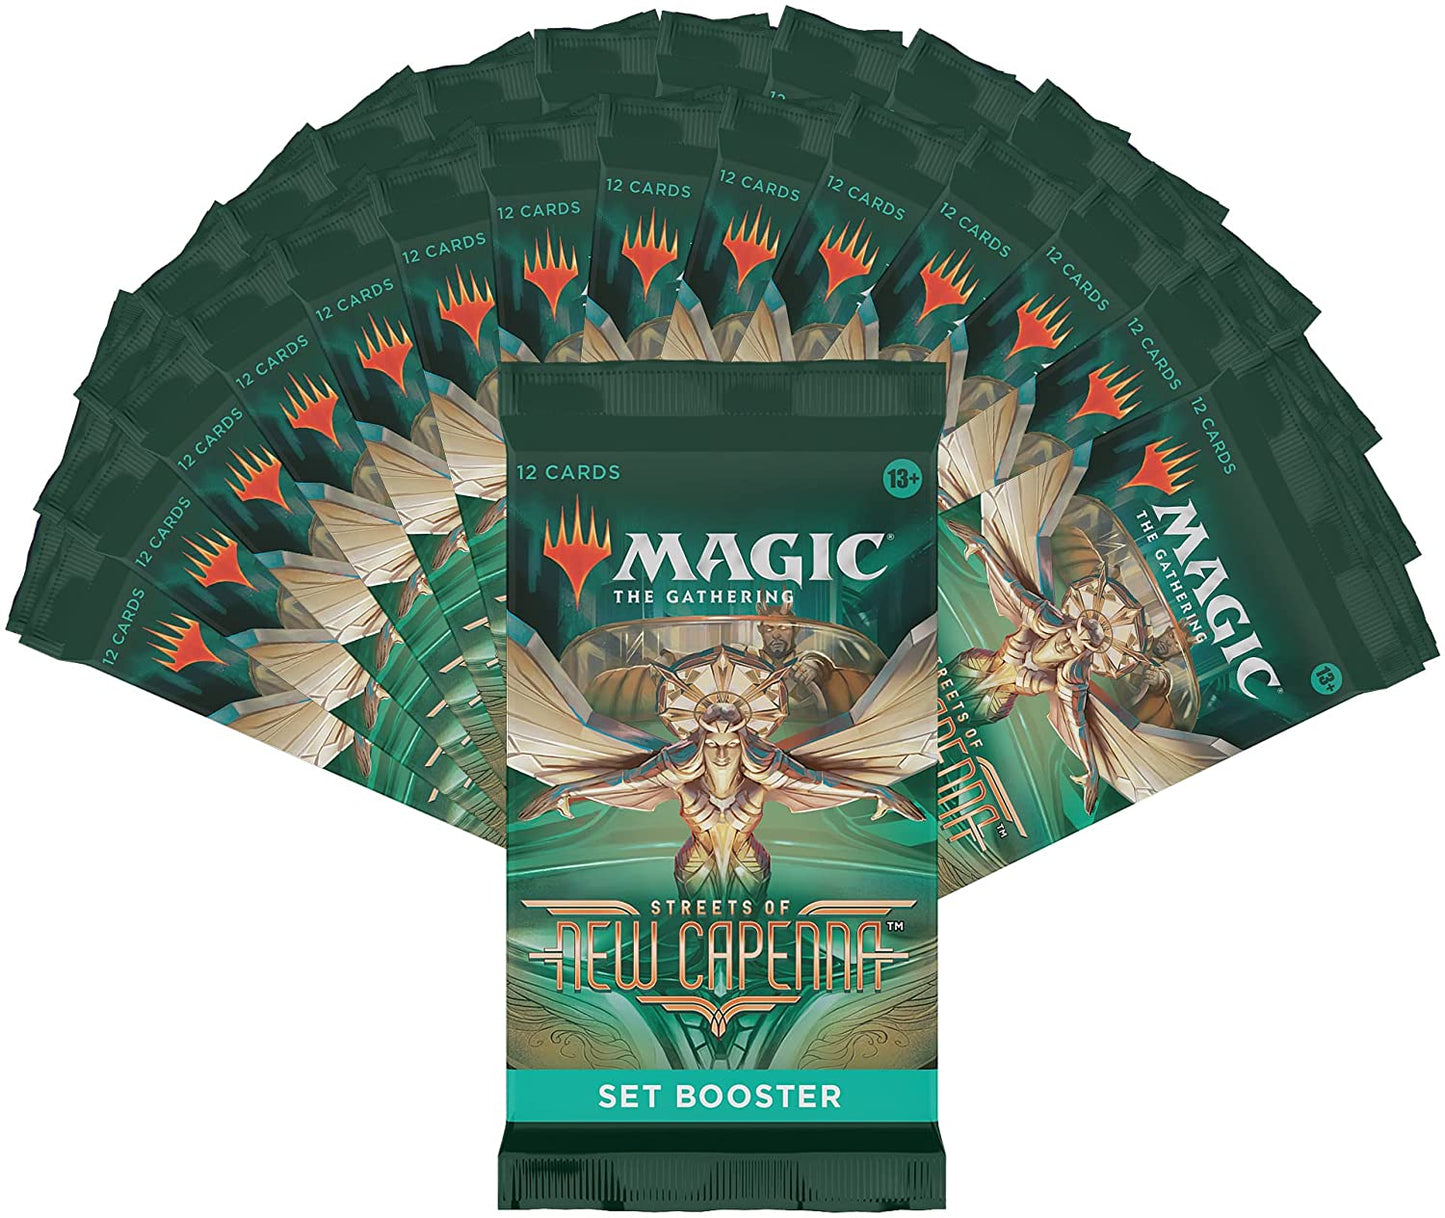 Magic: The Gathering Set Booster Box Case - Streets of New Capenna (Case of 6)